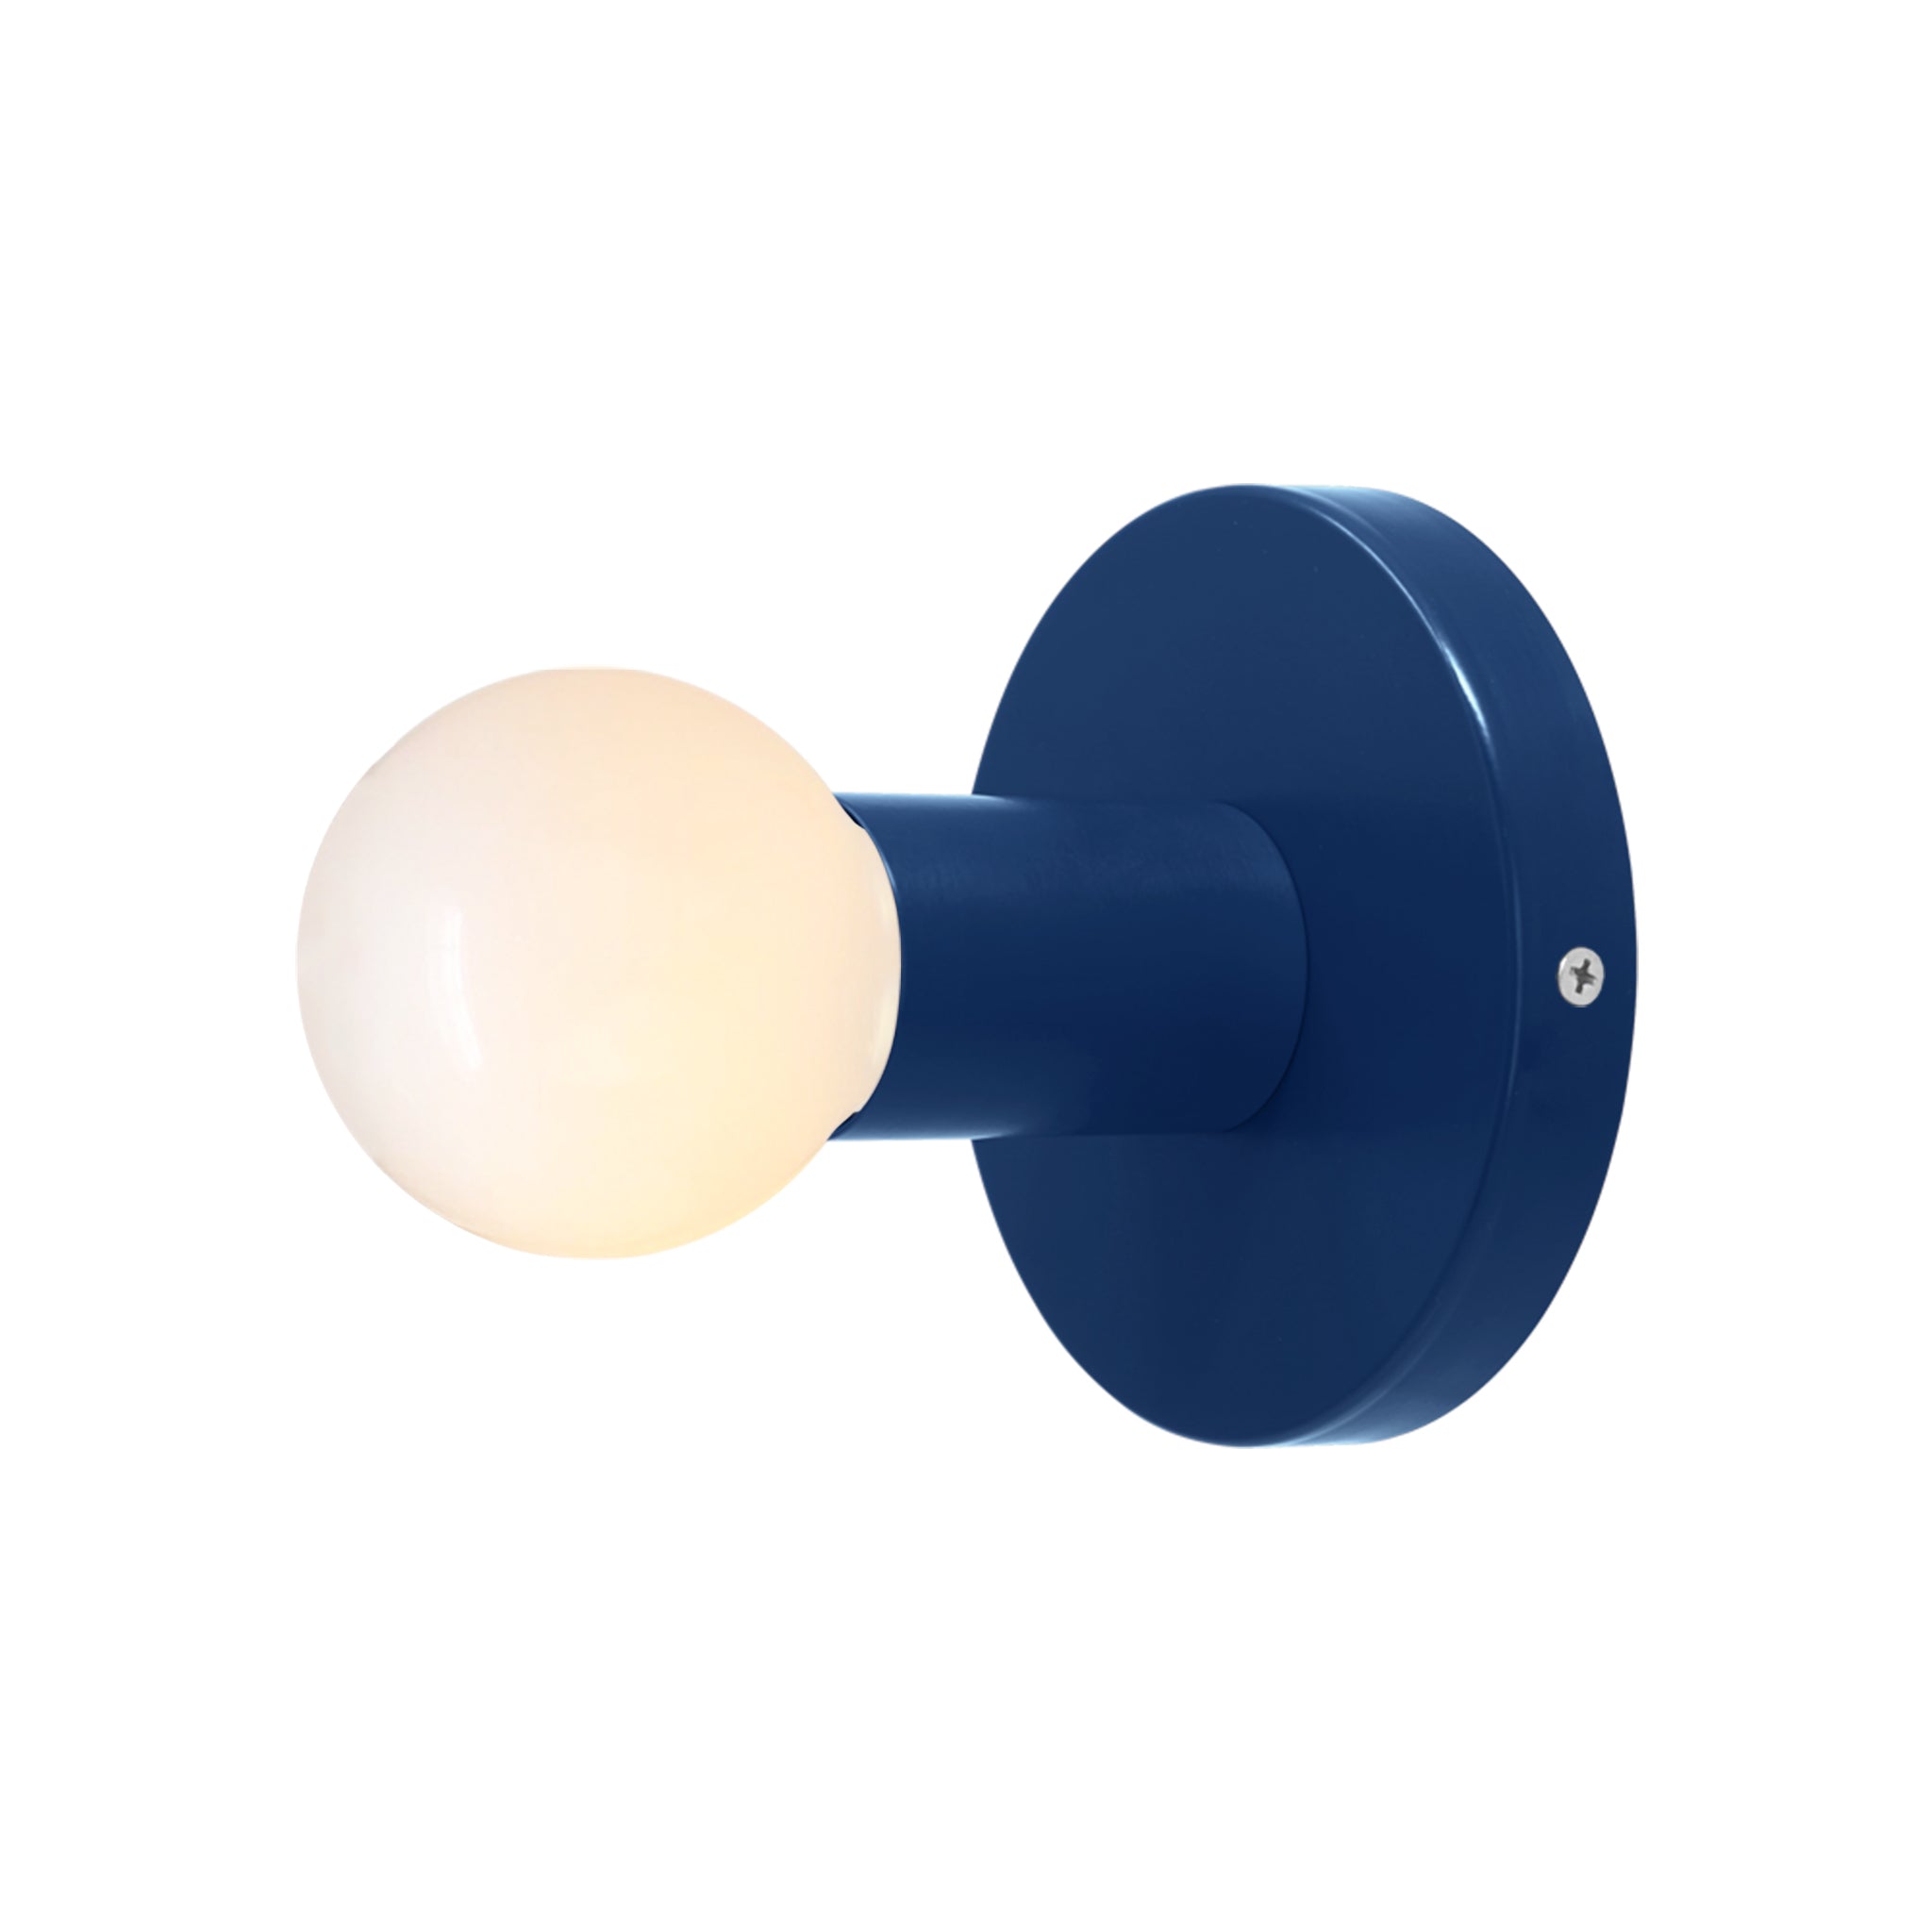 Nickel and cobalt color Twink sconce Dutton Brown lighting